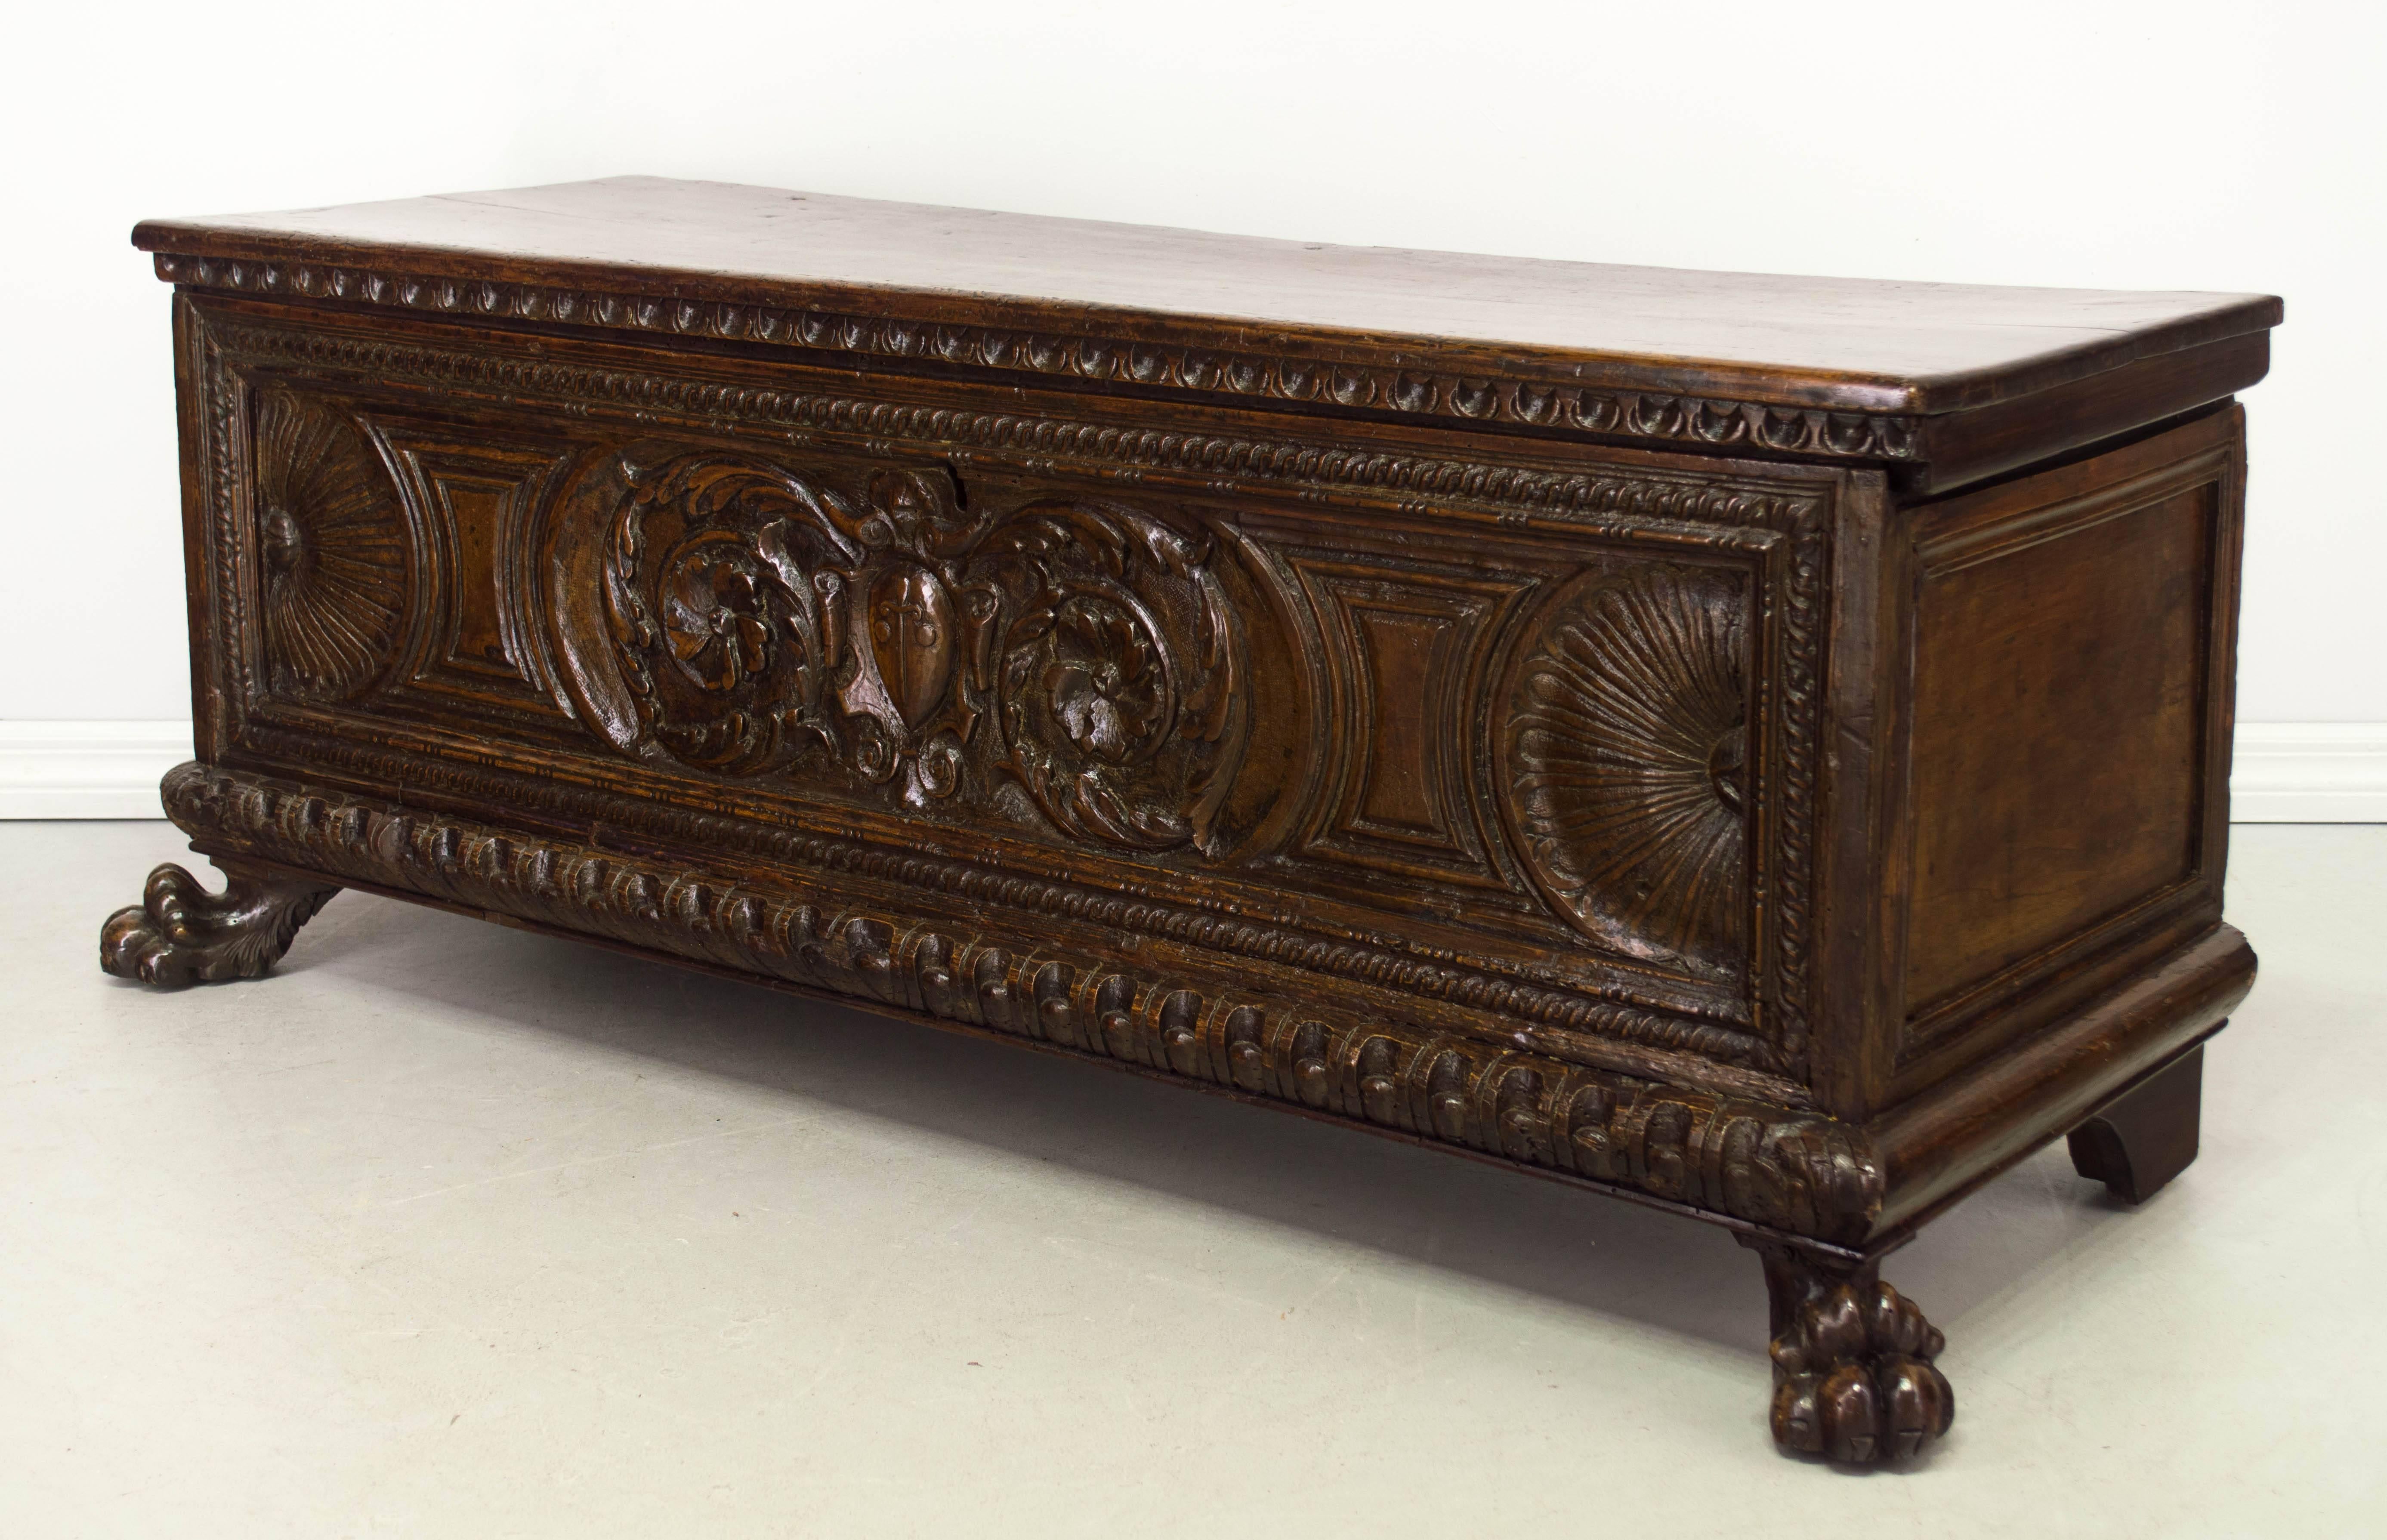 18th century Italian cassonne or chest made of solid walnut with decoration carved in low relief. Large lion paw feet in front. Lock, but no key. Waxed patina. Restoration on back legs and hinges. We have a large selection of French antiques. Please